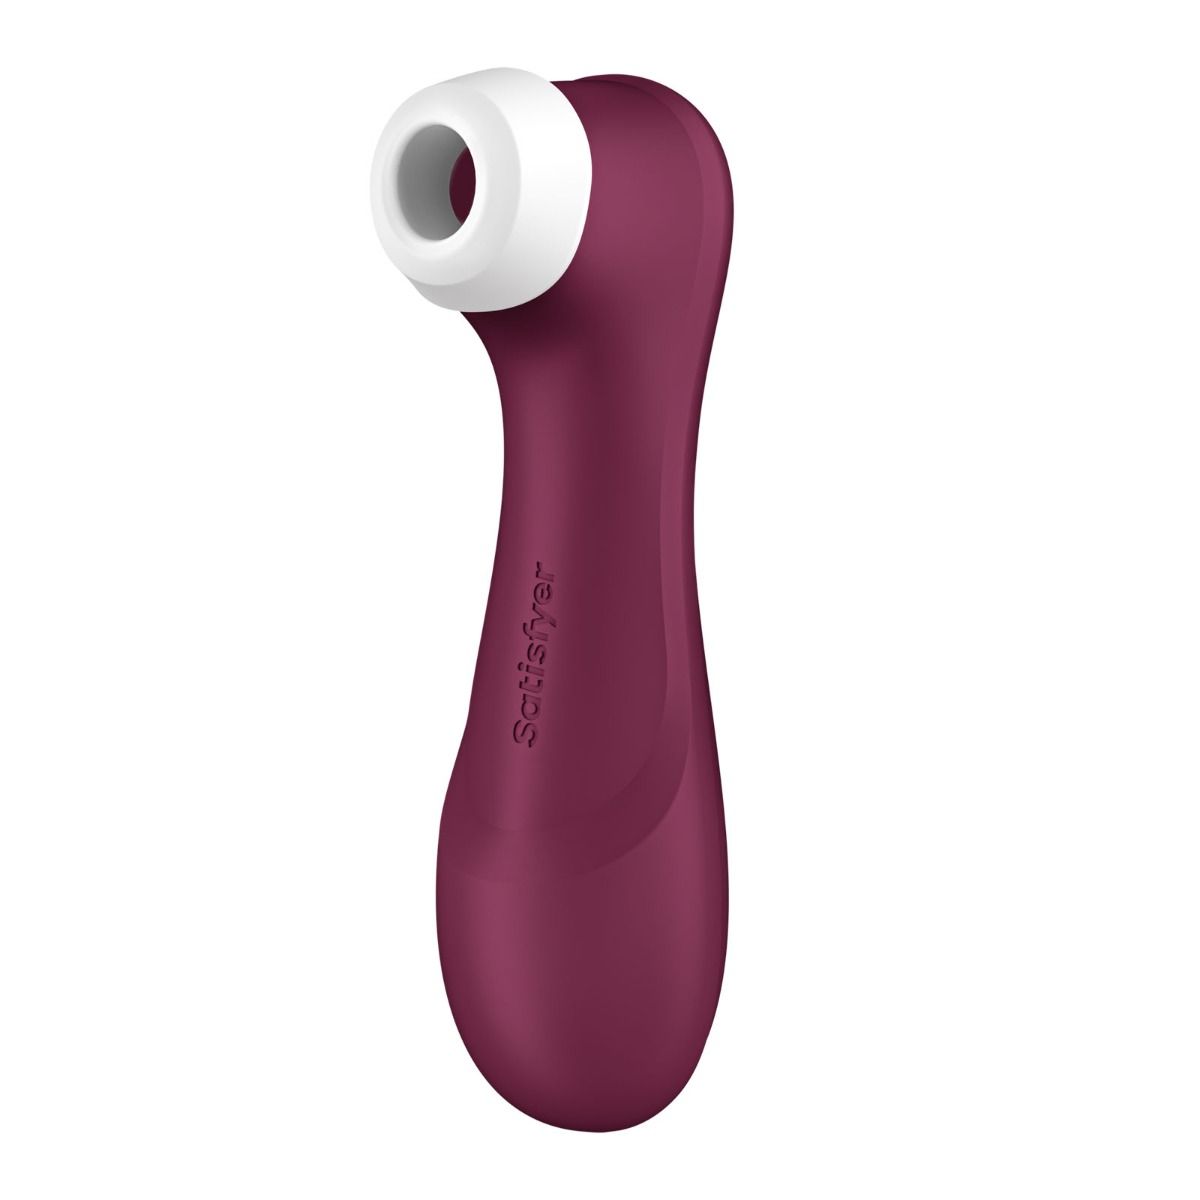 Pro 2 Generation 3 with Liquid Air Technology  Vibration and Bluetooth/App Wine Red